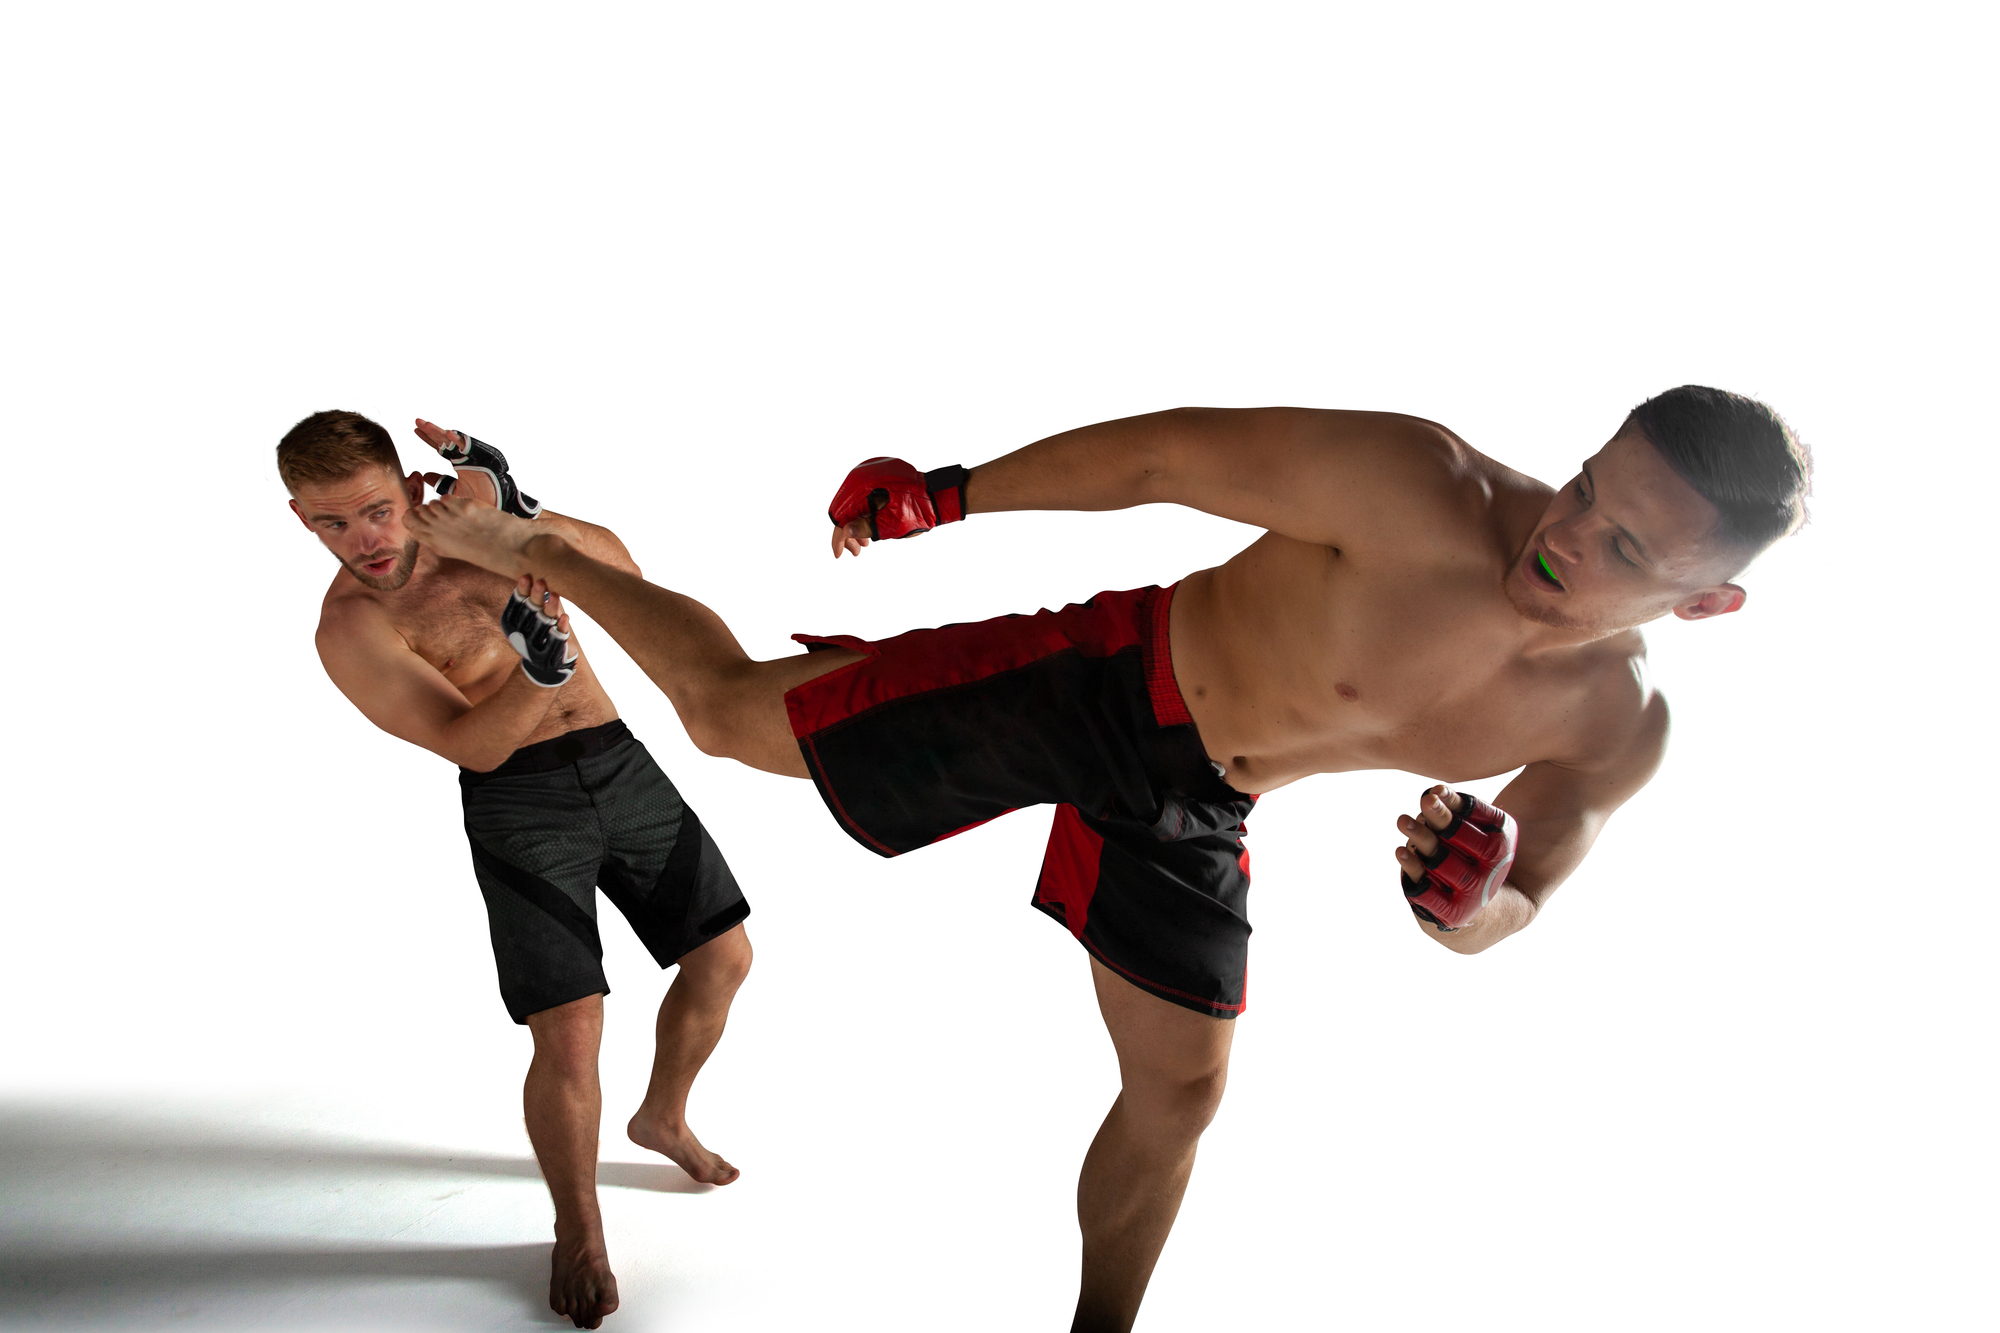 Learn MMA at Home – 8 Steps to Get Started Today